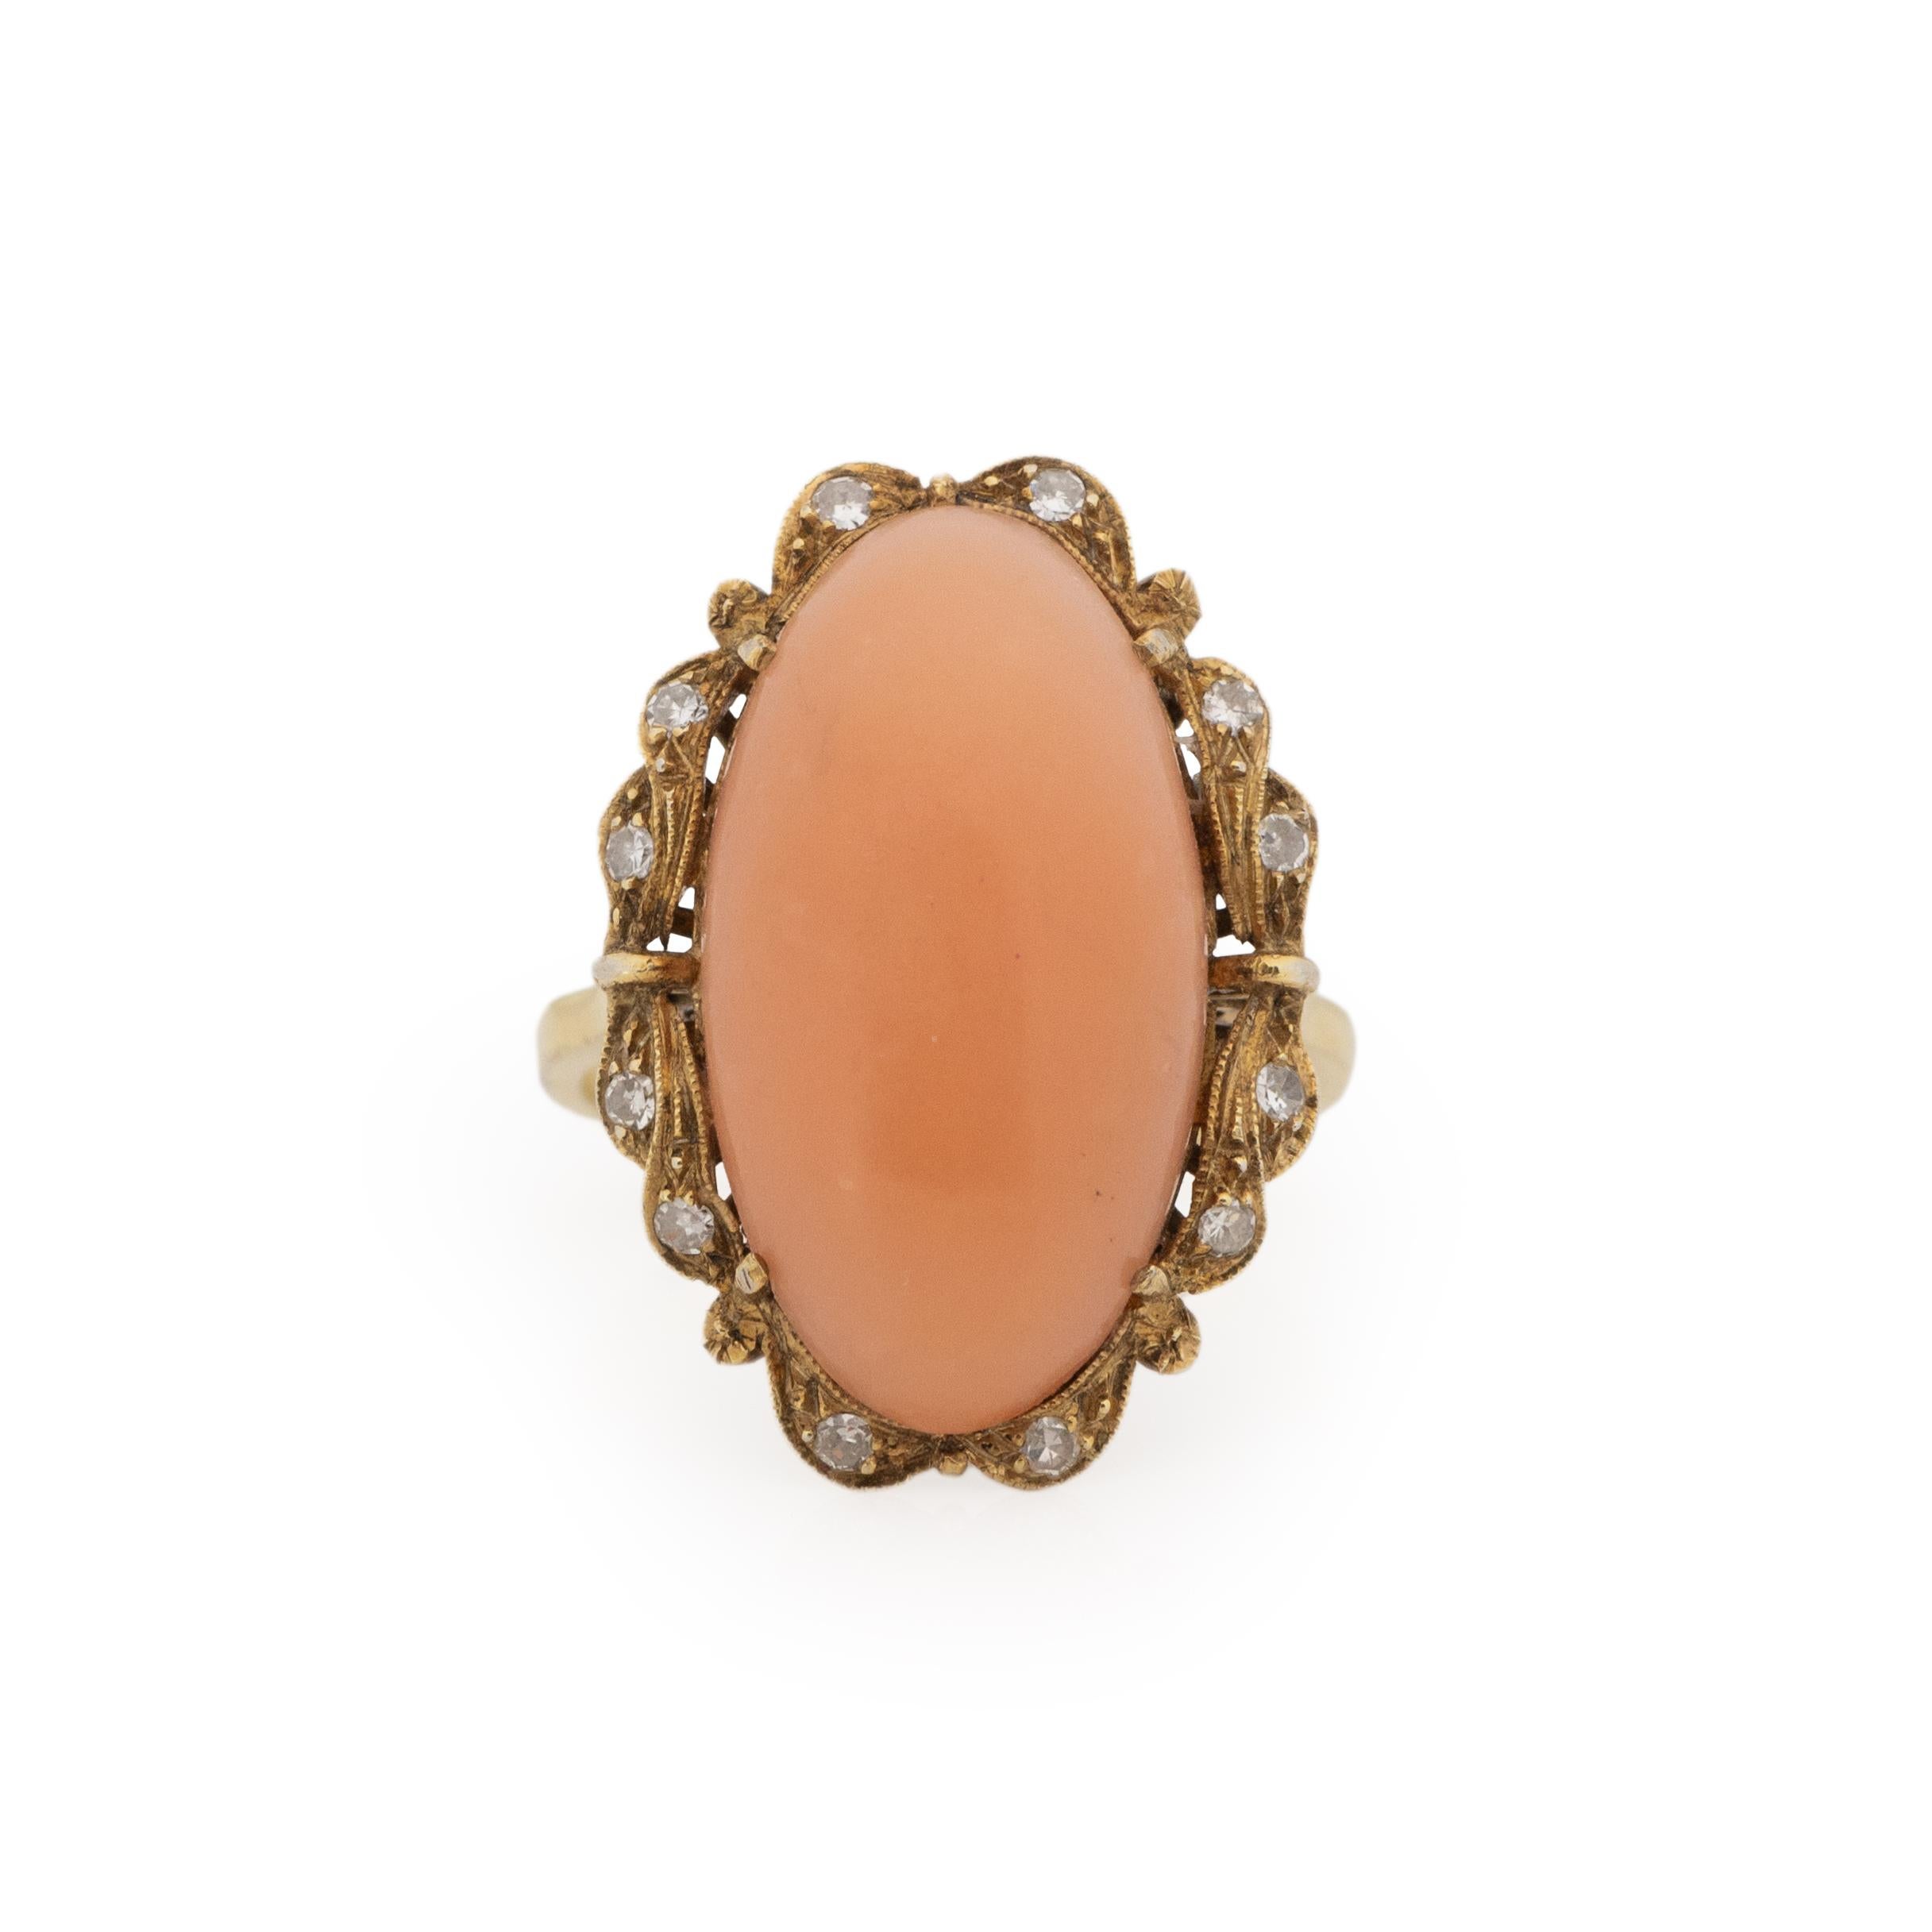 This Victorian show piece is crafted in a rich 18K yellow gold. The smooth tapered shanks takes the eye up to a simple gallery. Being held in the gallery is a beautiful oval cabochon of coral that is a pale peachy orange color. This color is called